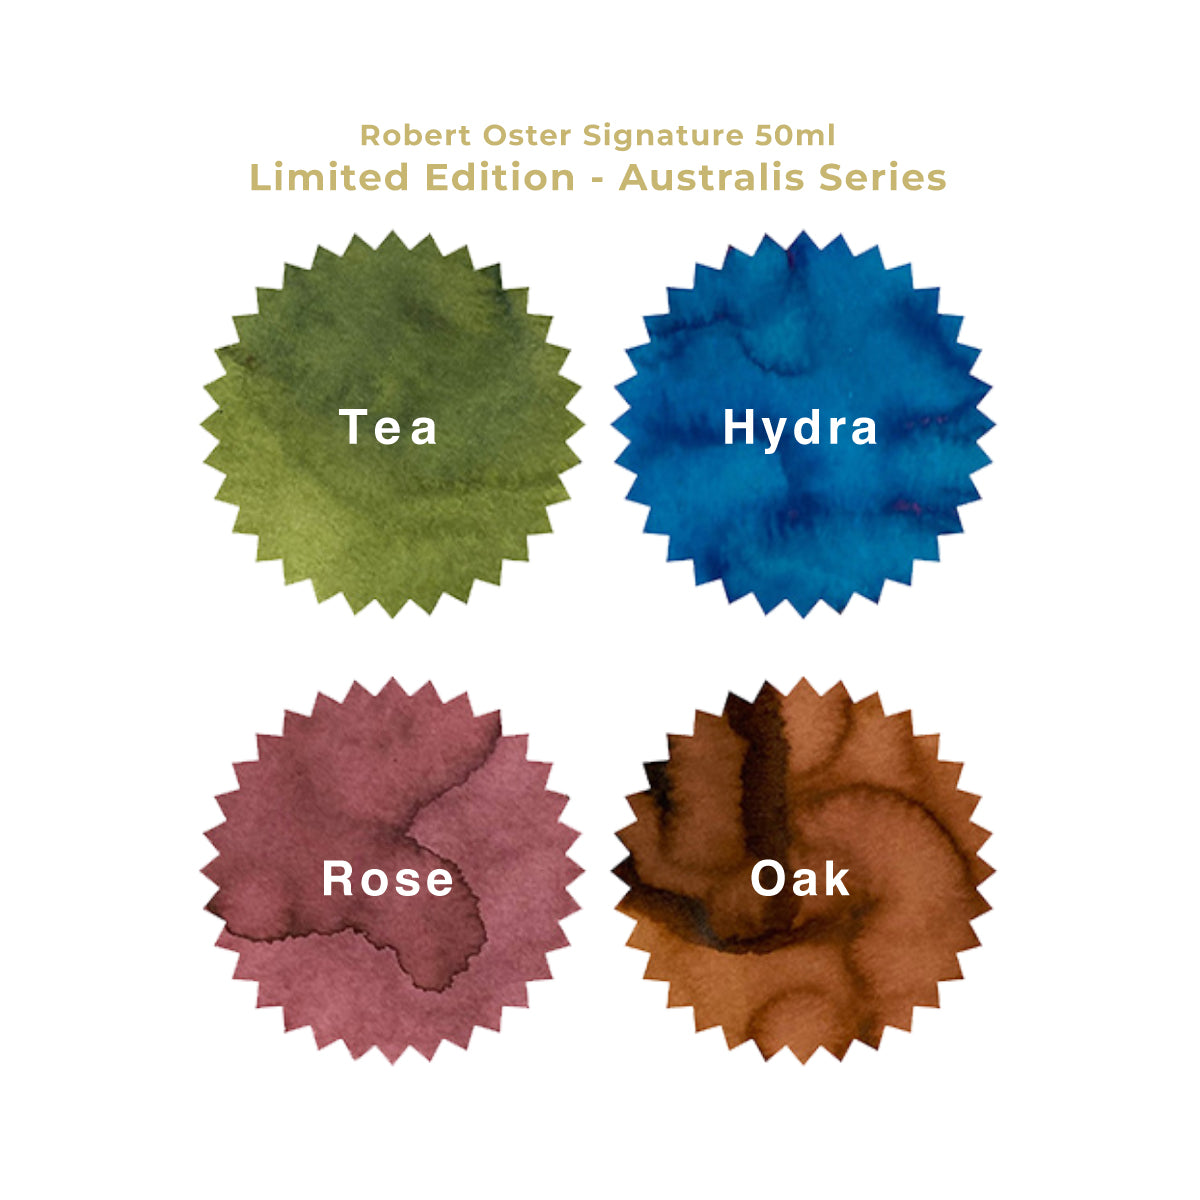 Robert Oster Inks [50ml] Australis Series - Limited Edition